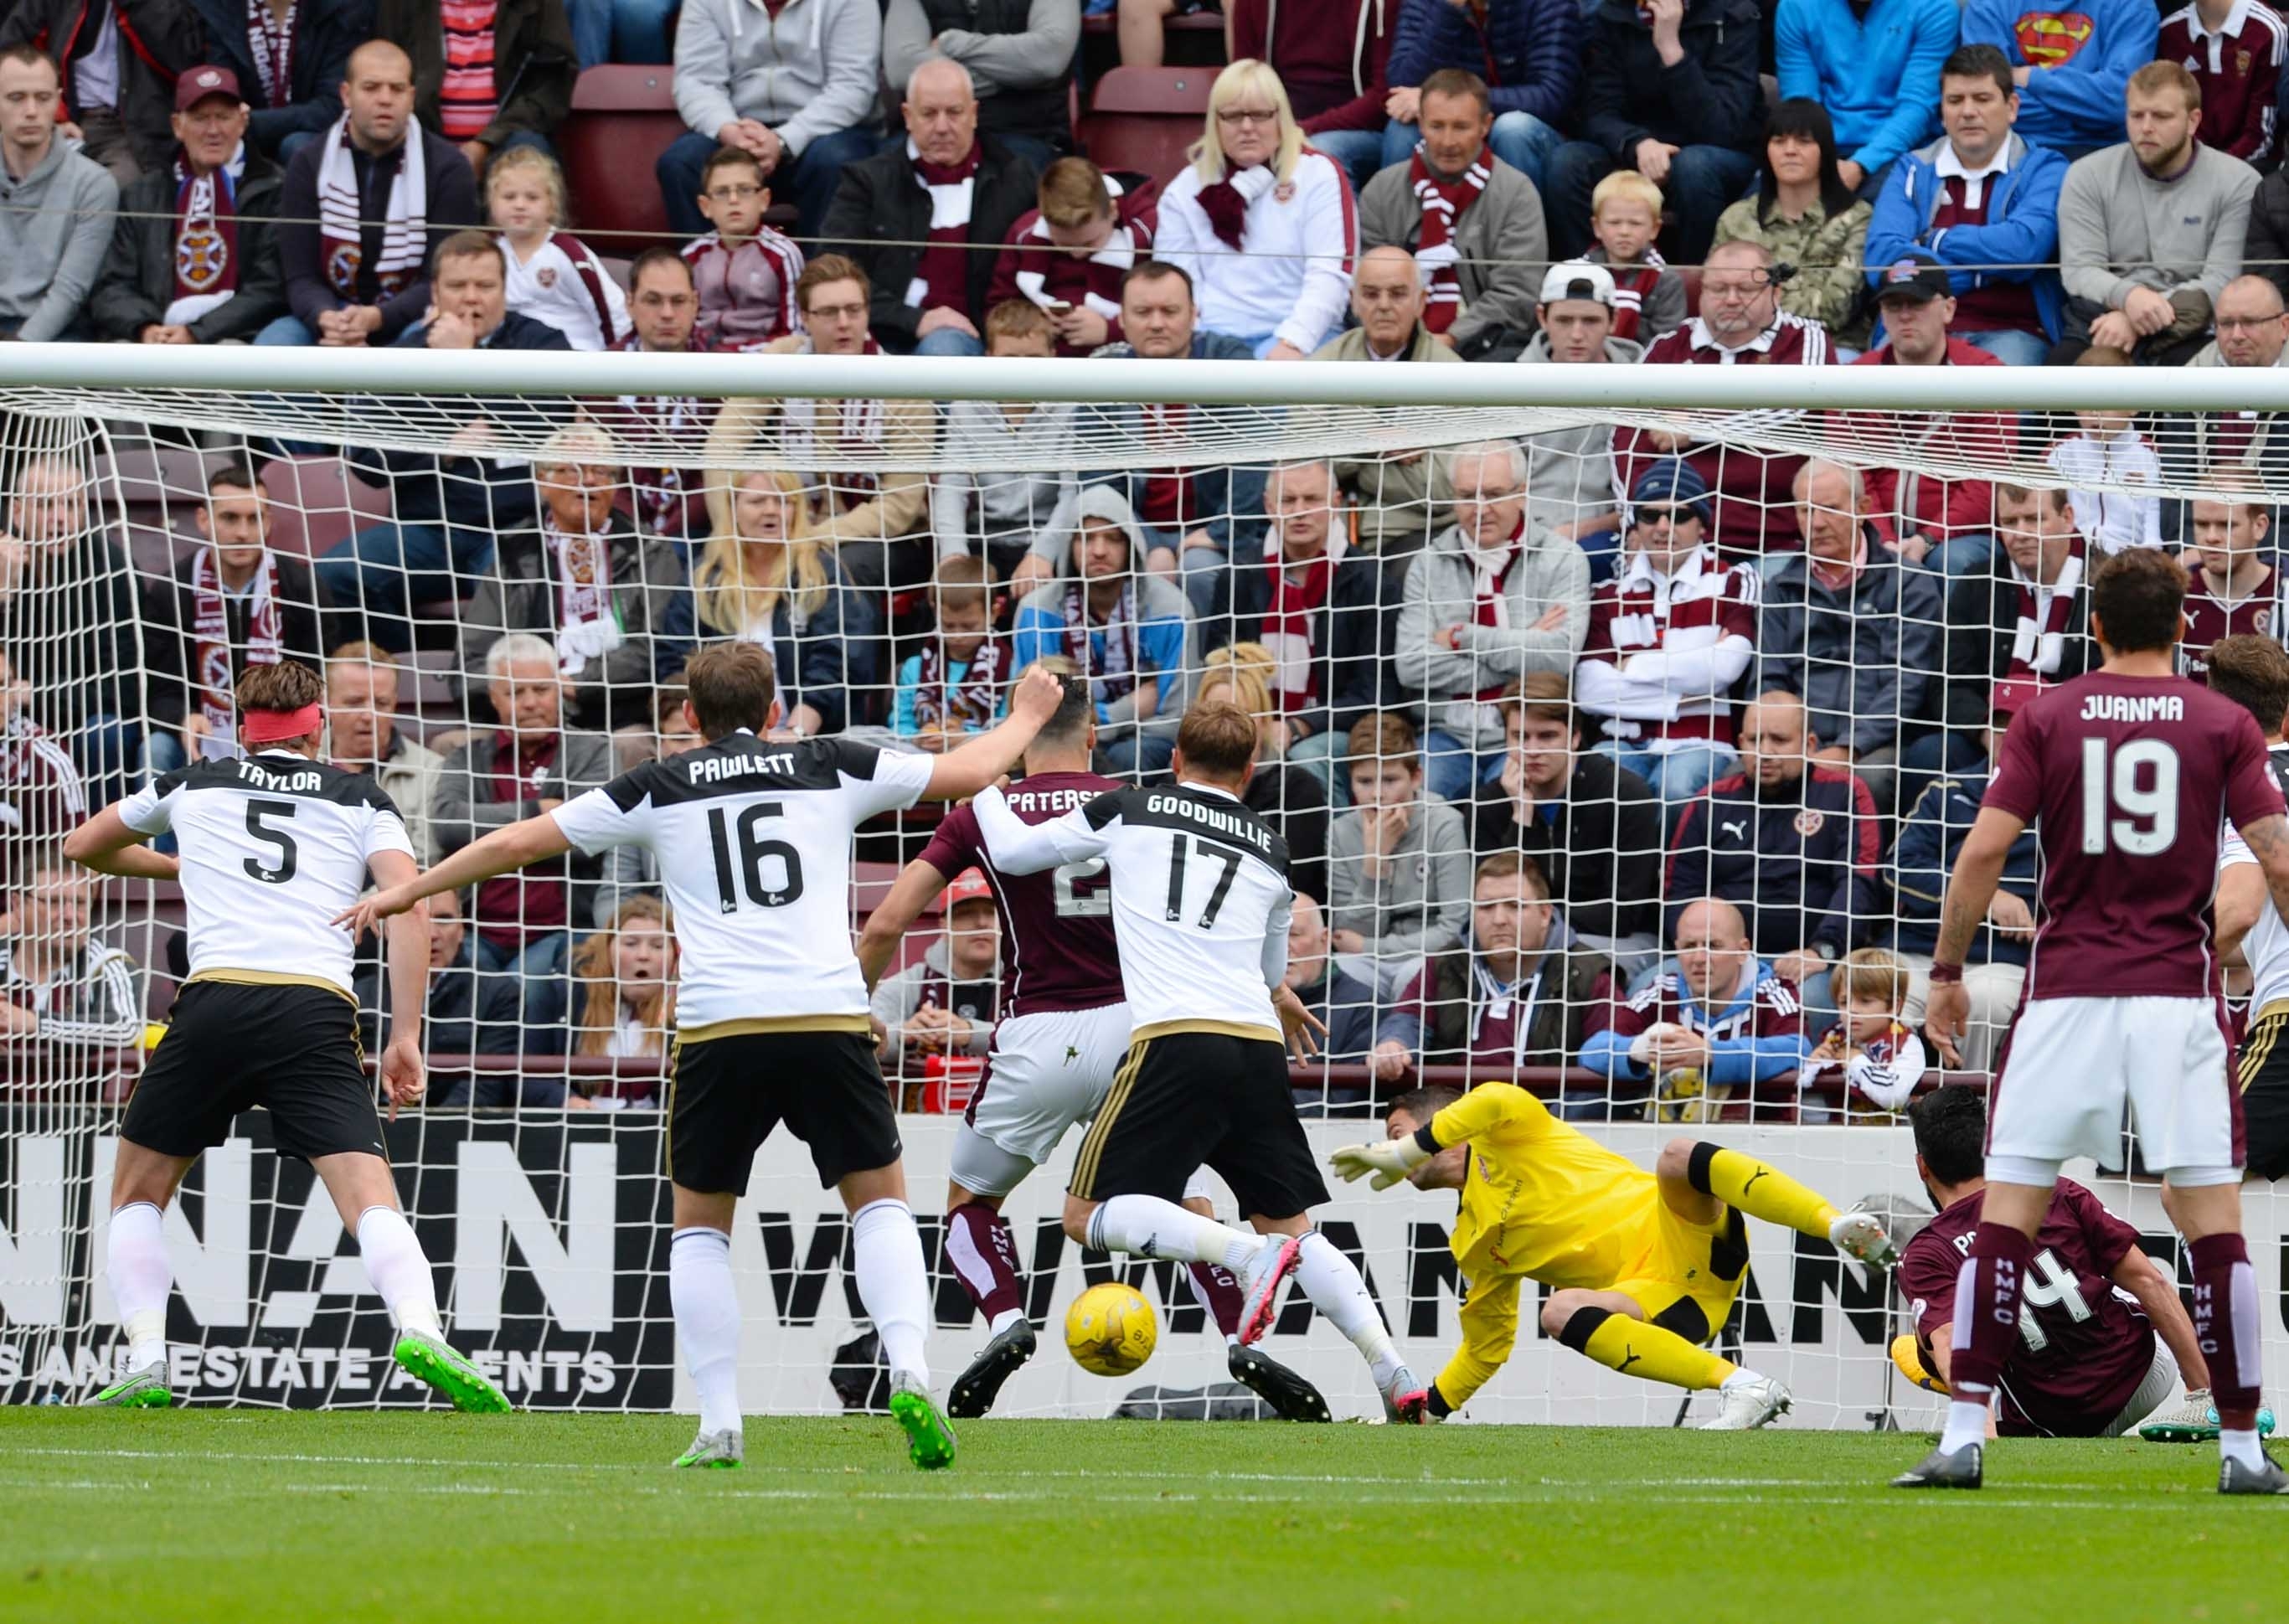 The Dons won 3-1 against Hearts at Tynecastle earlier this season.